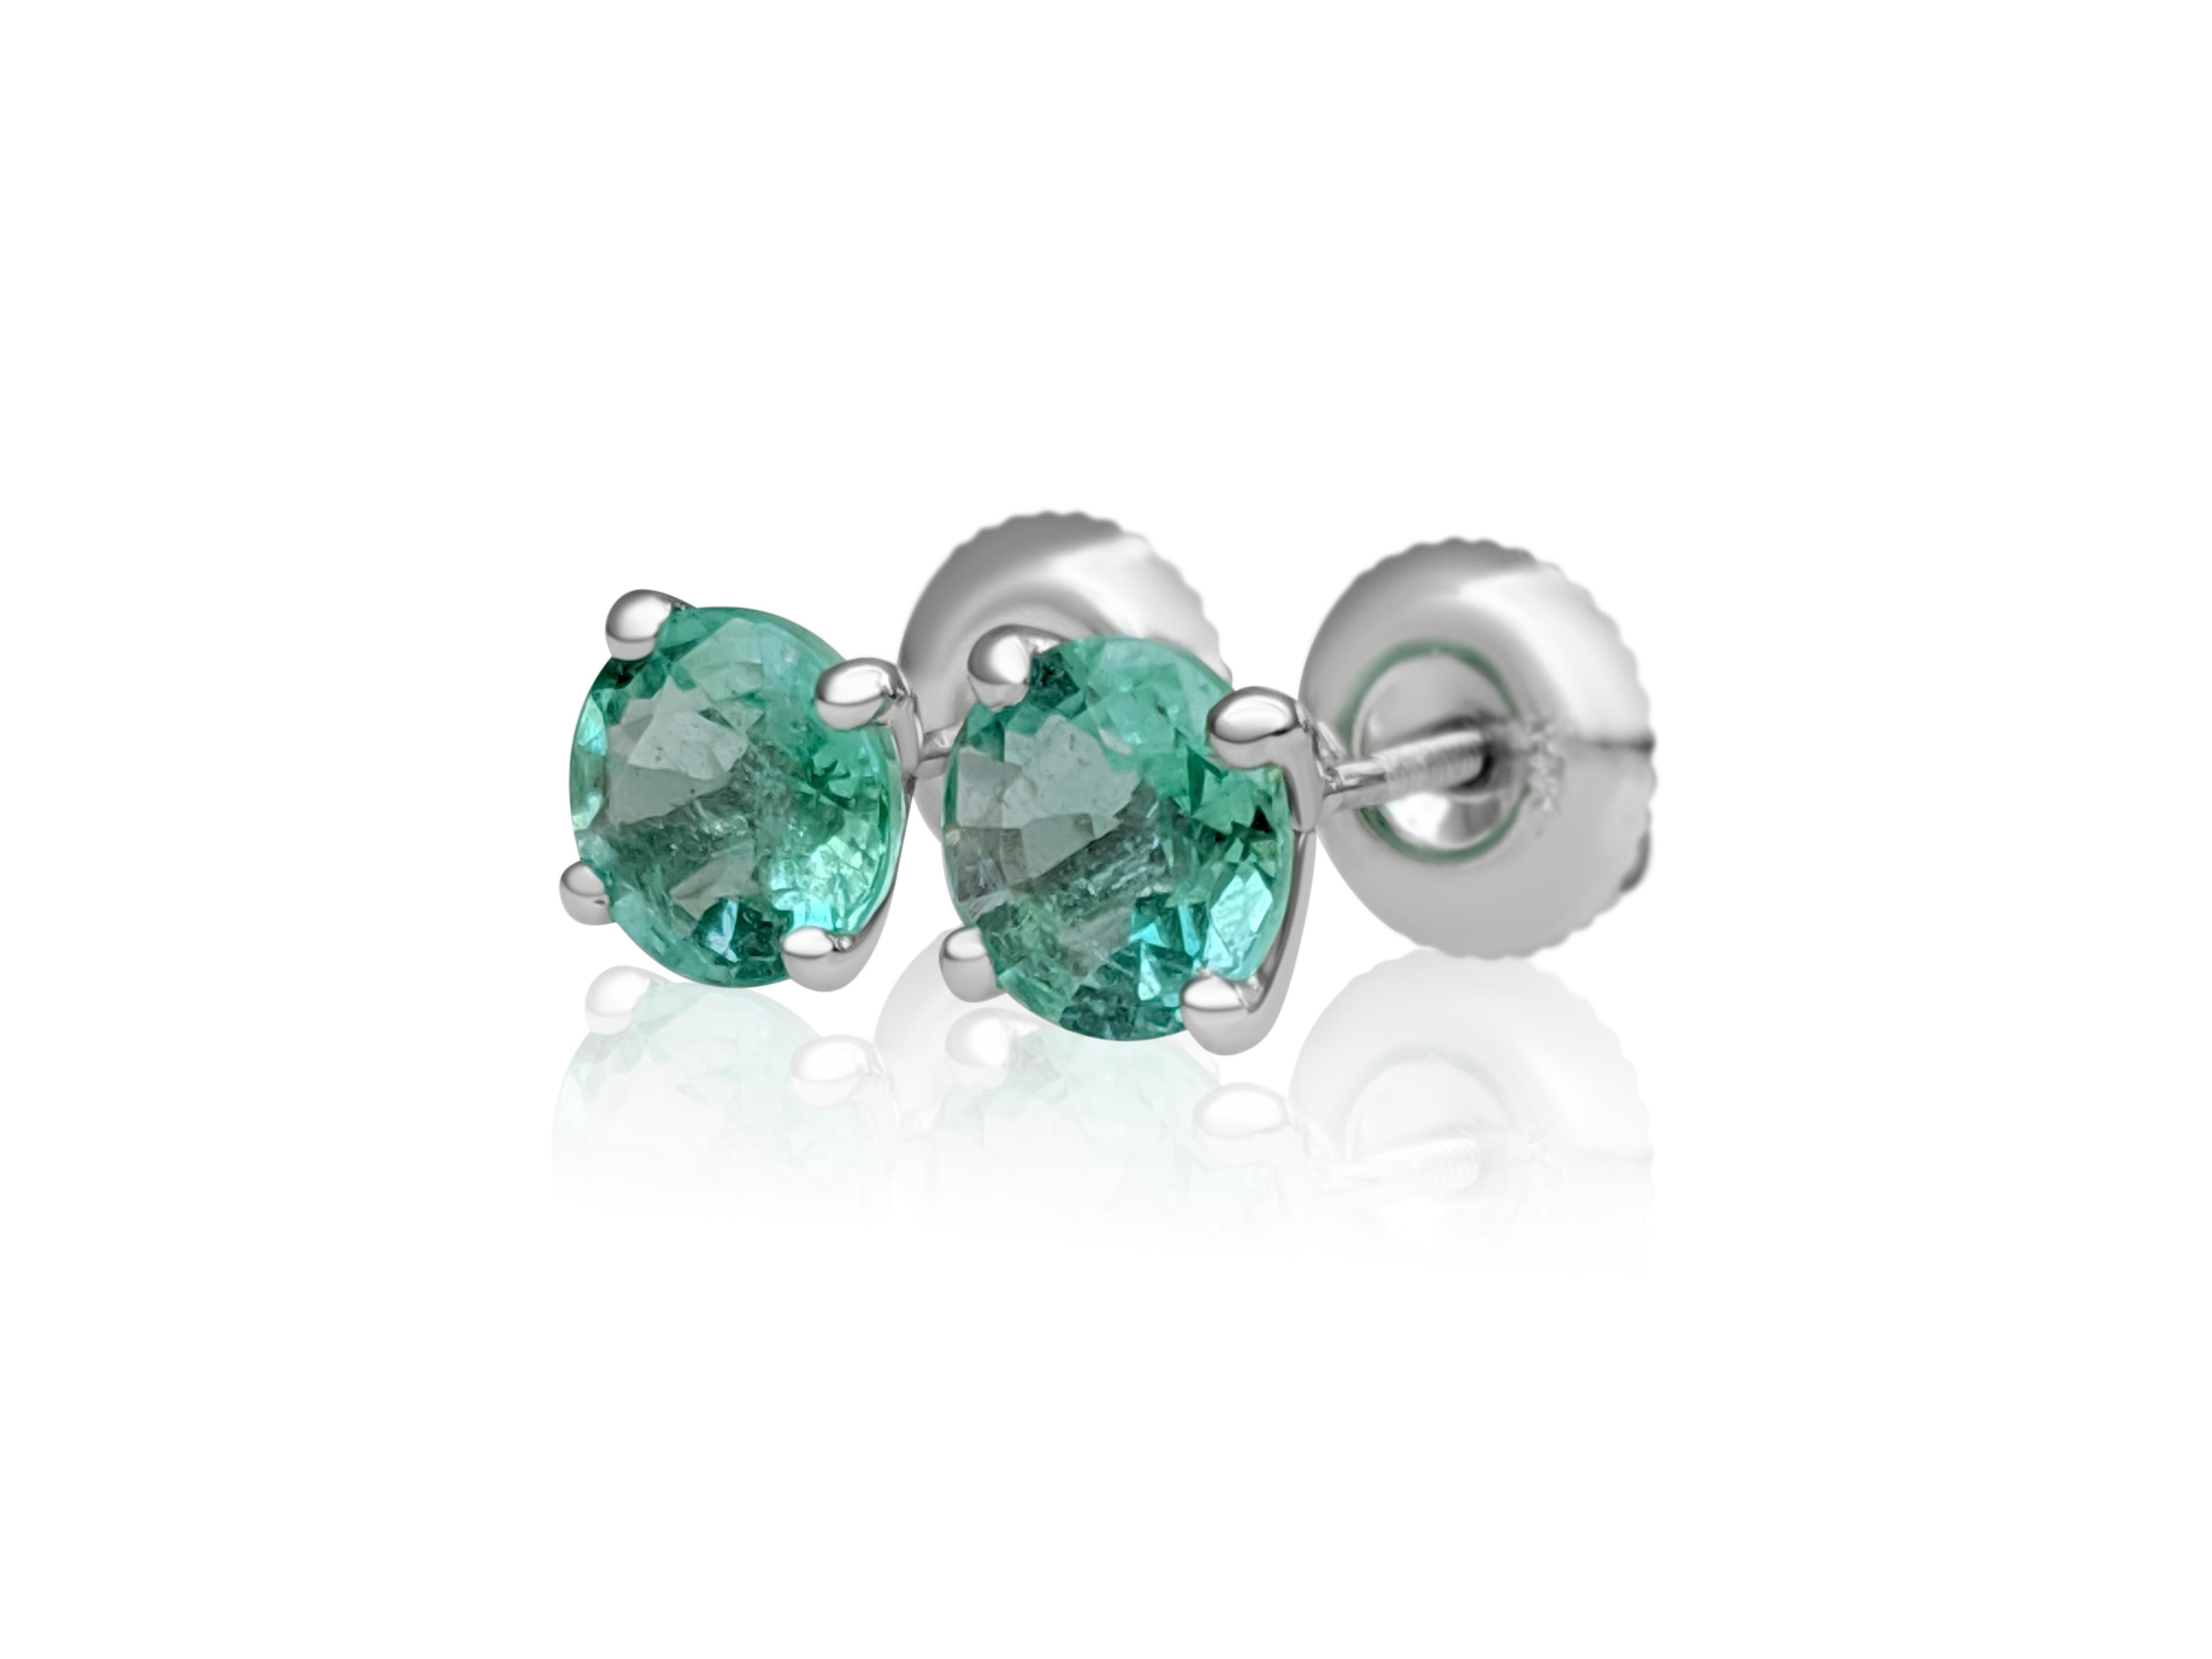 Round Cut NO RESERVE! 1.20 Ct Emerald - 14 kt. White gold - Earrings For Sale